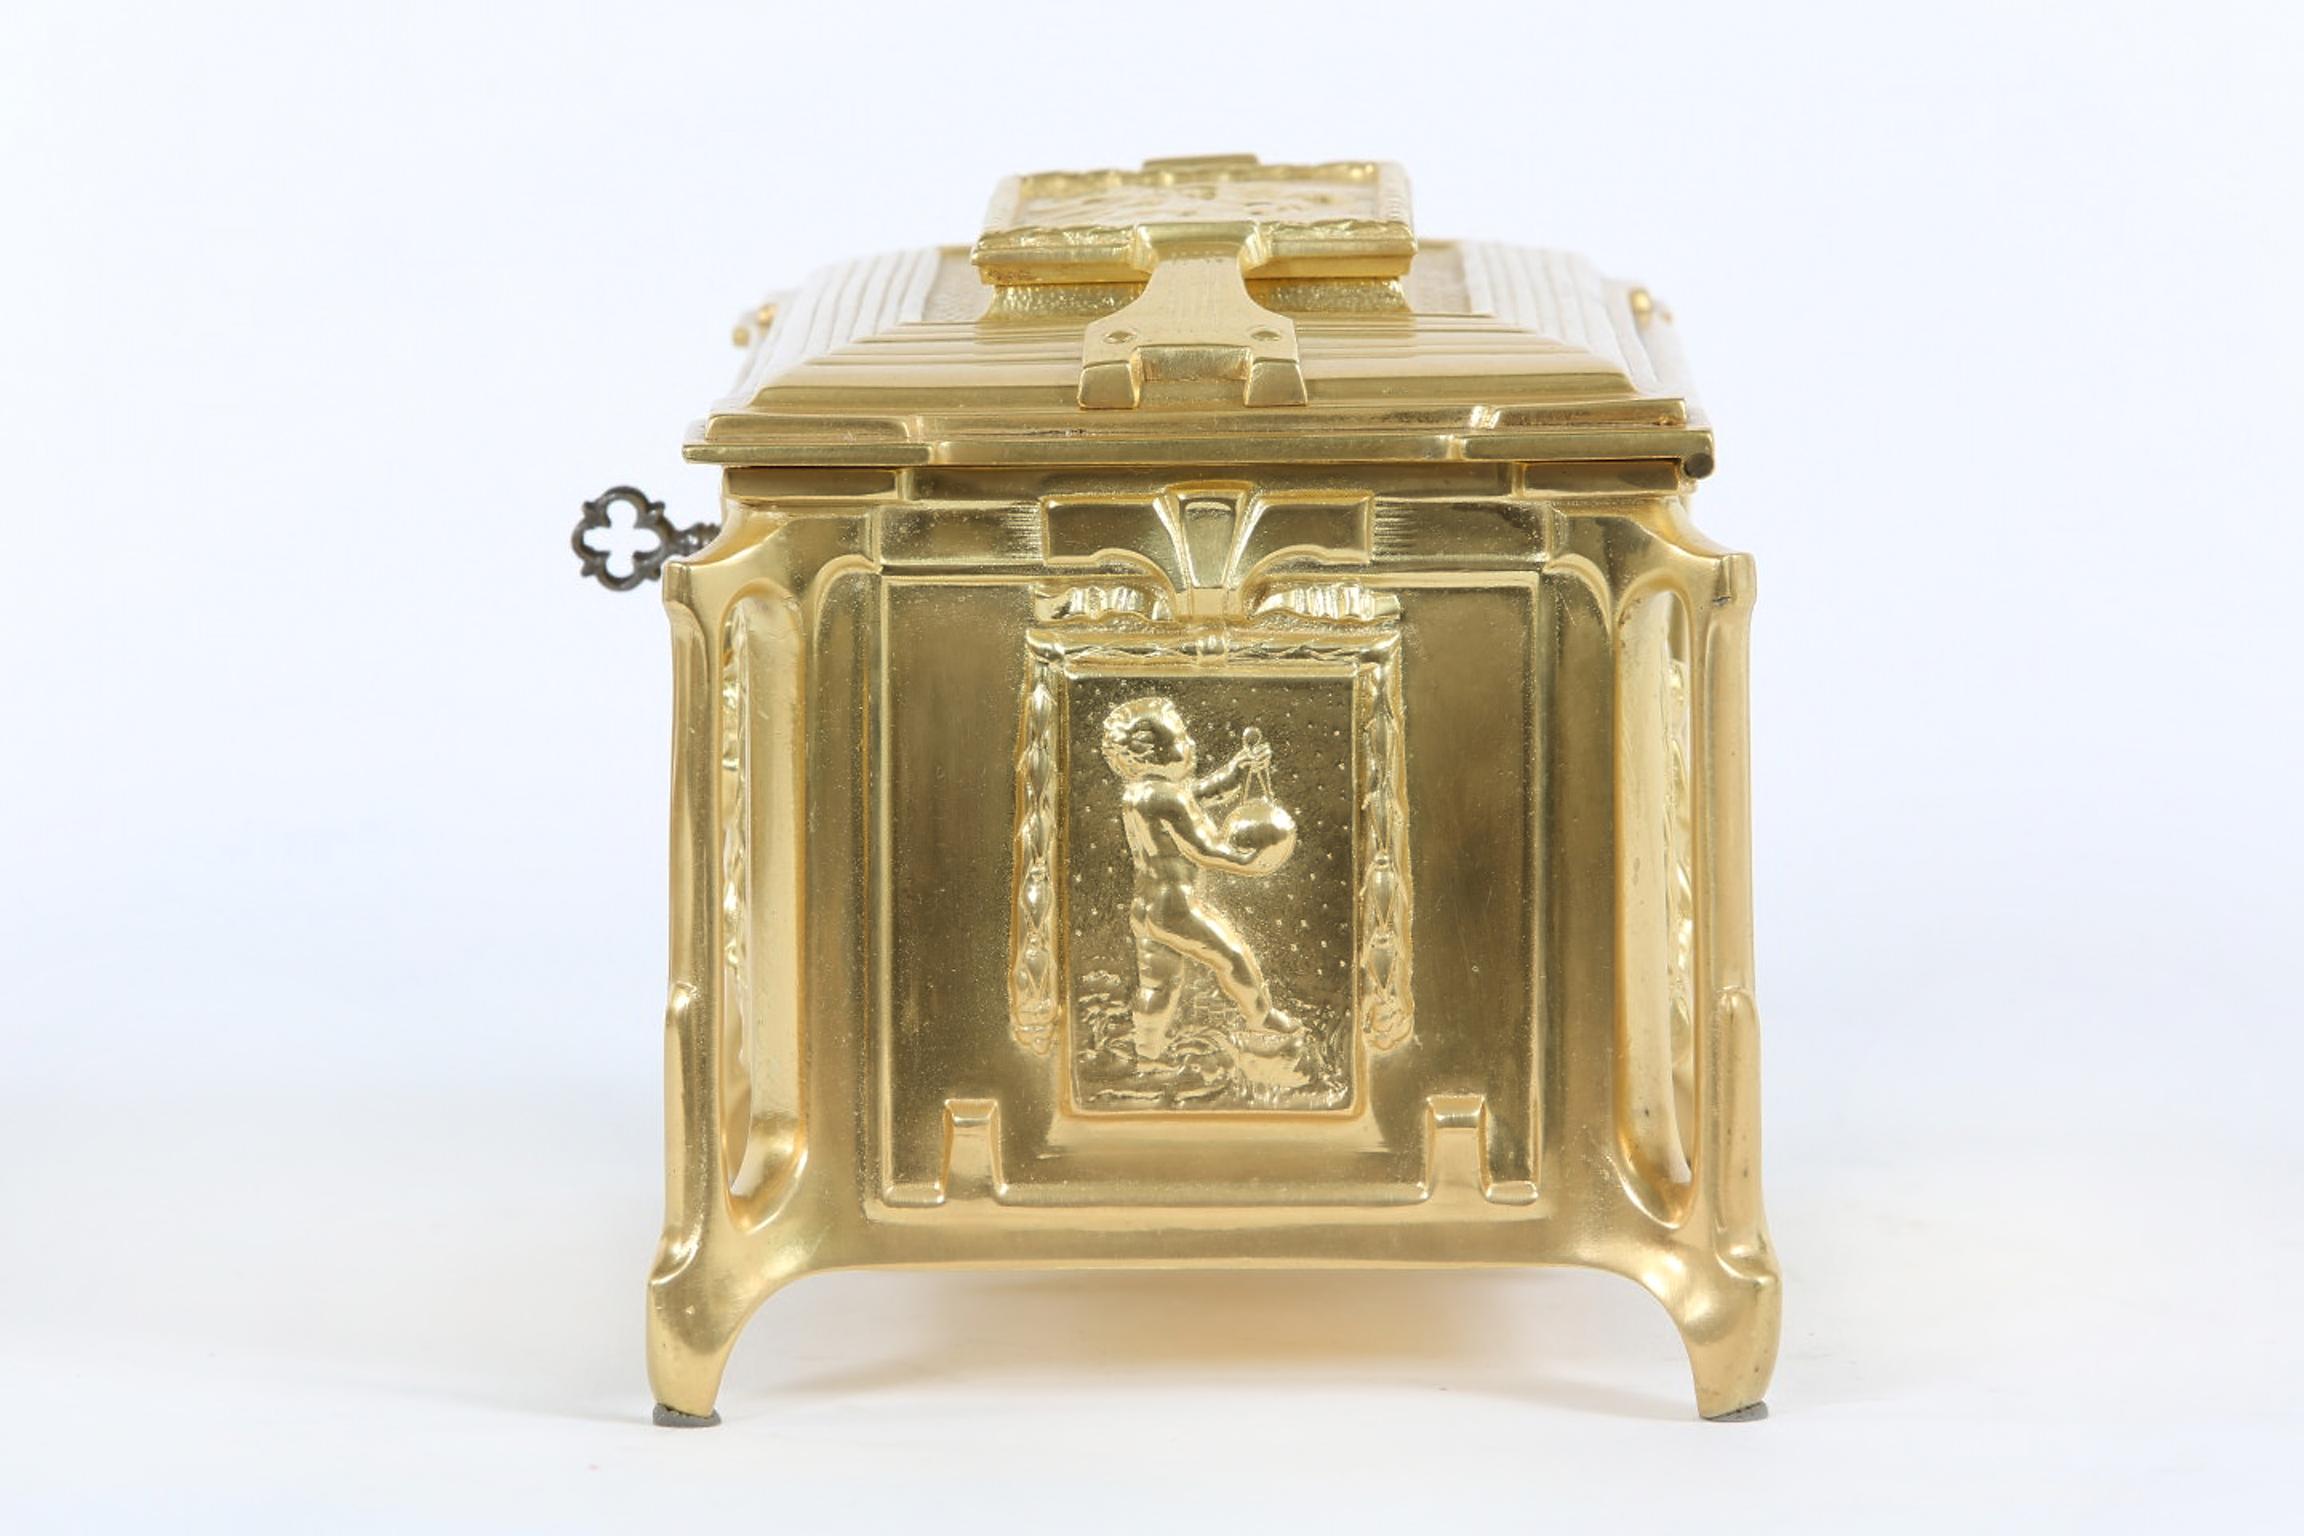 Empire Gilt Dore Bronze Metal Footed Covered Box